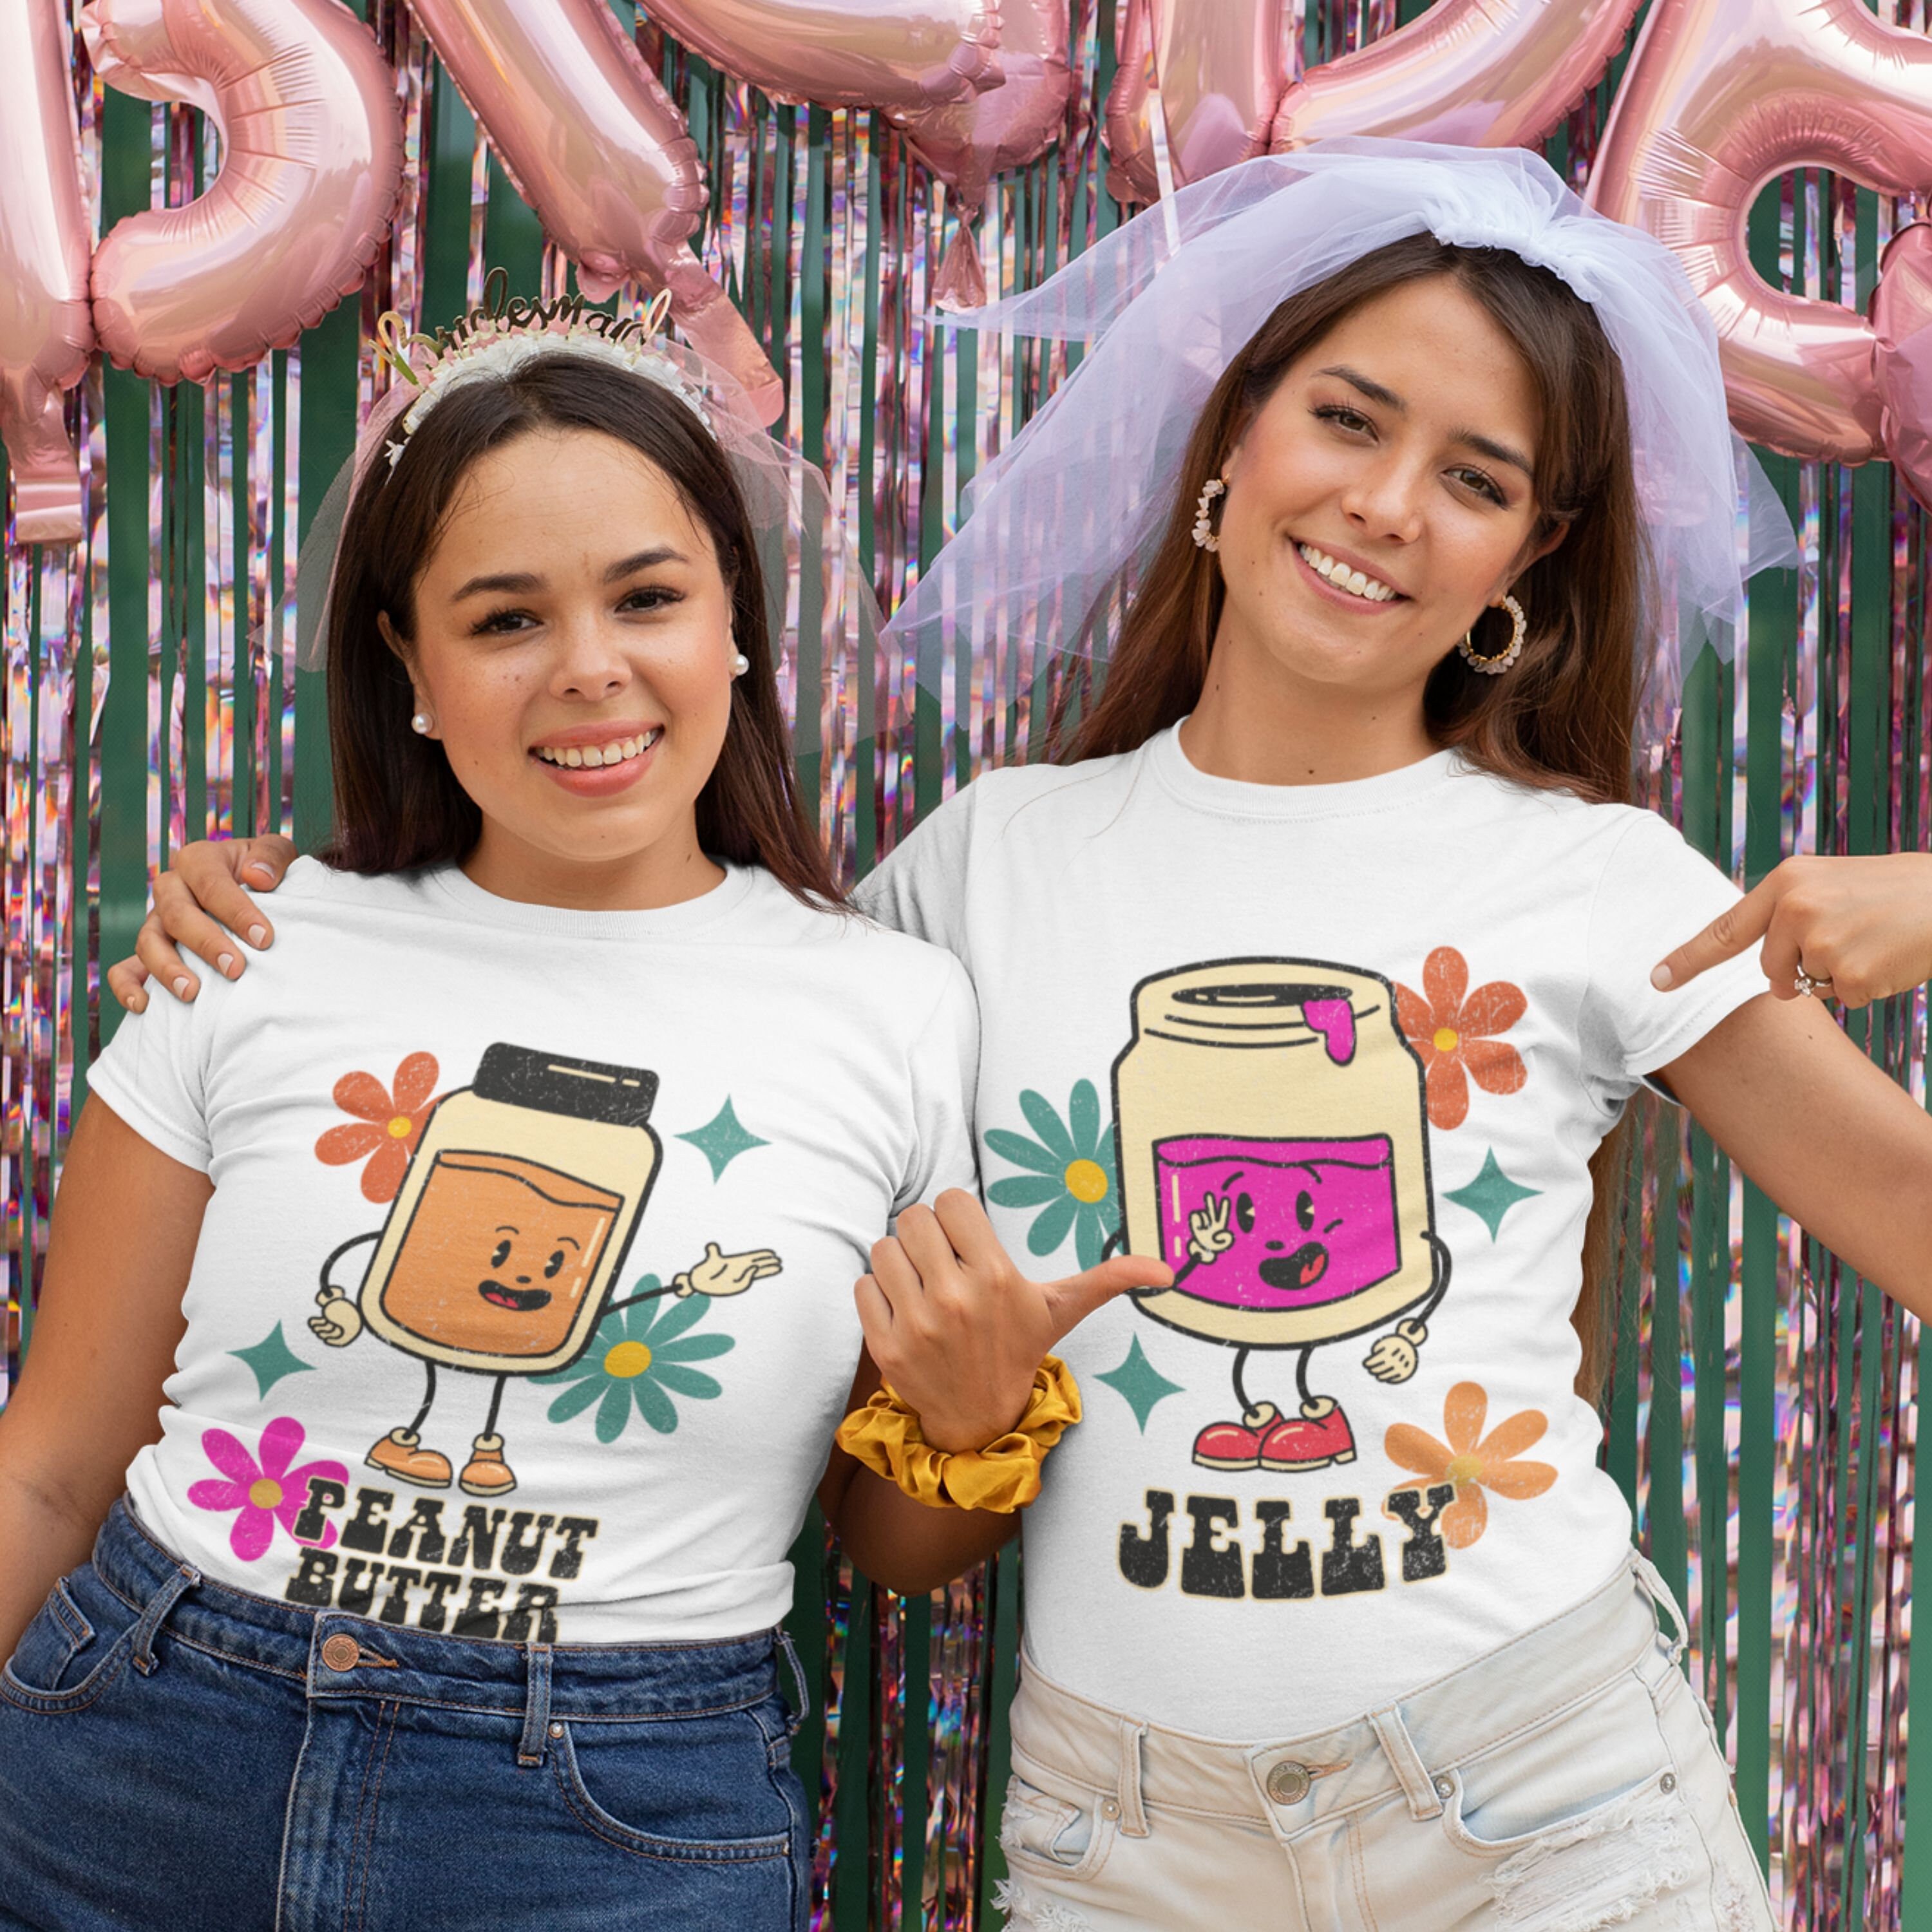 Discover Peanut Butter and Jelly Shirts, Best Friends Shirts Shirts, BFF Shirts, Funny Halloween Shirts, Family Shirts, Bride and Bridesmaid shirts